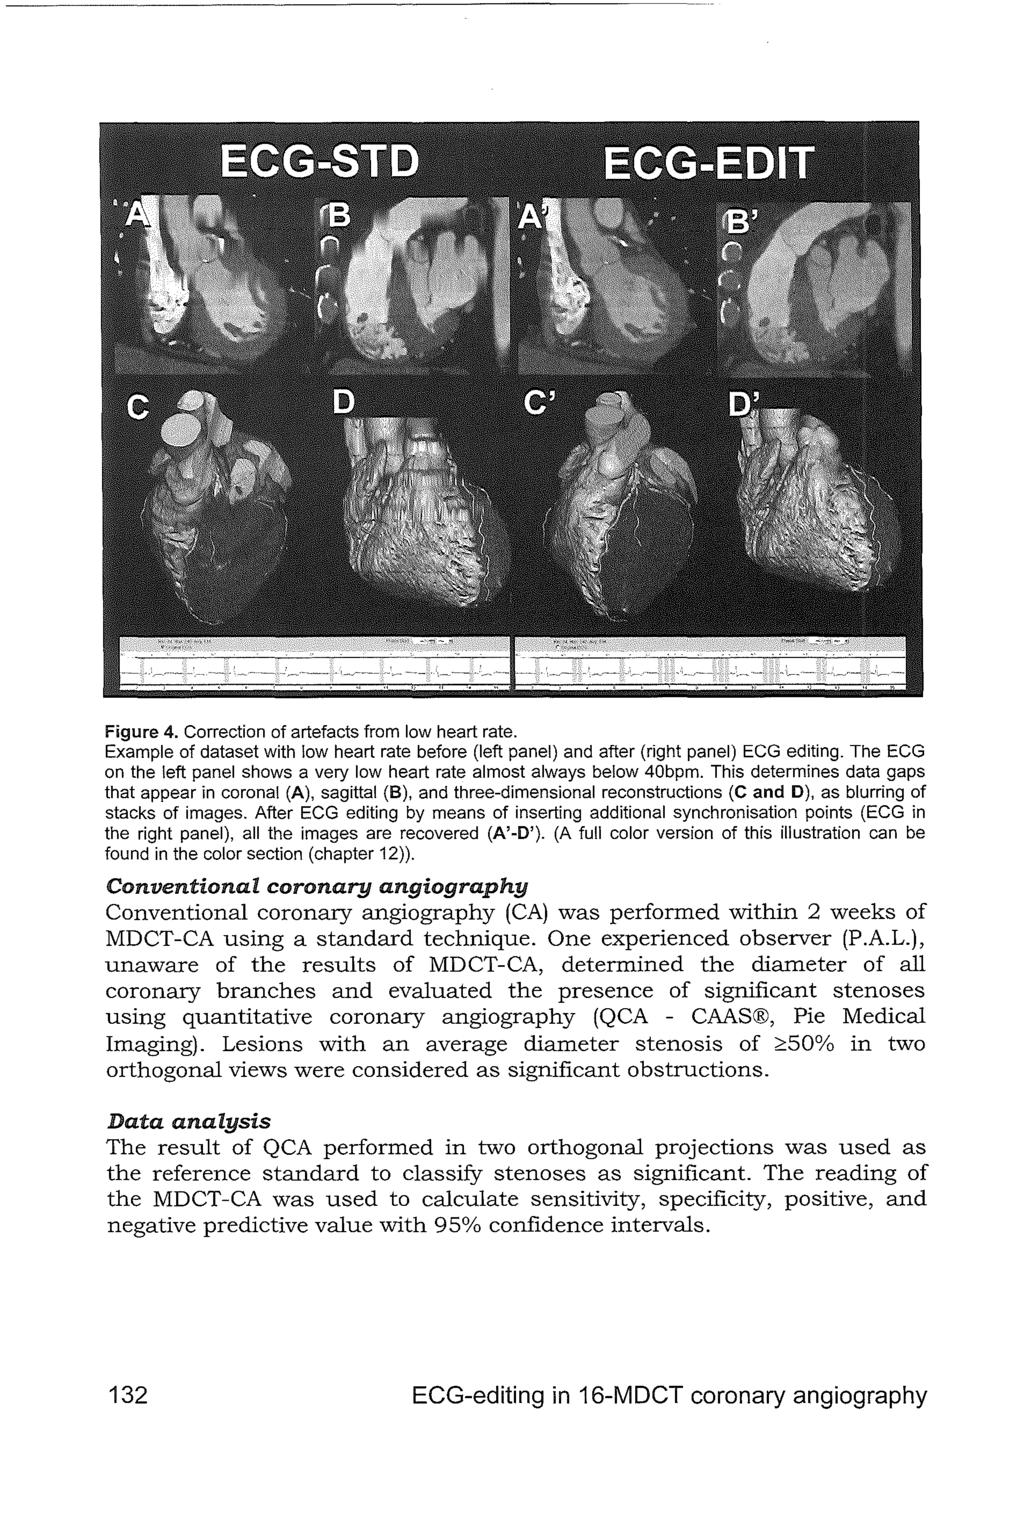 Figure 4. Correction of artefacts from low heart rate. Example of dataset with low heart rate before (left panel) and after (right panel) ECG editing.